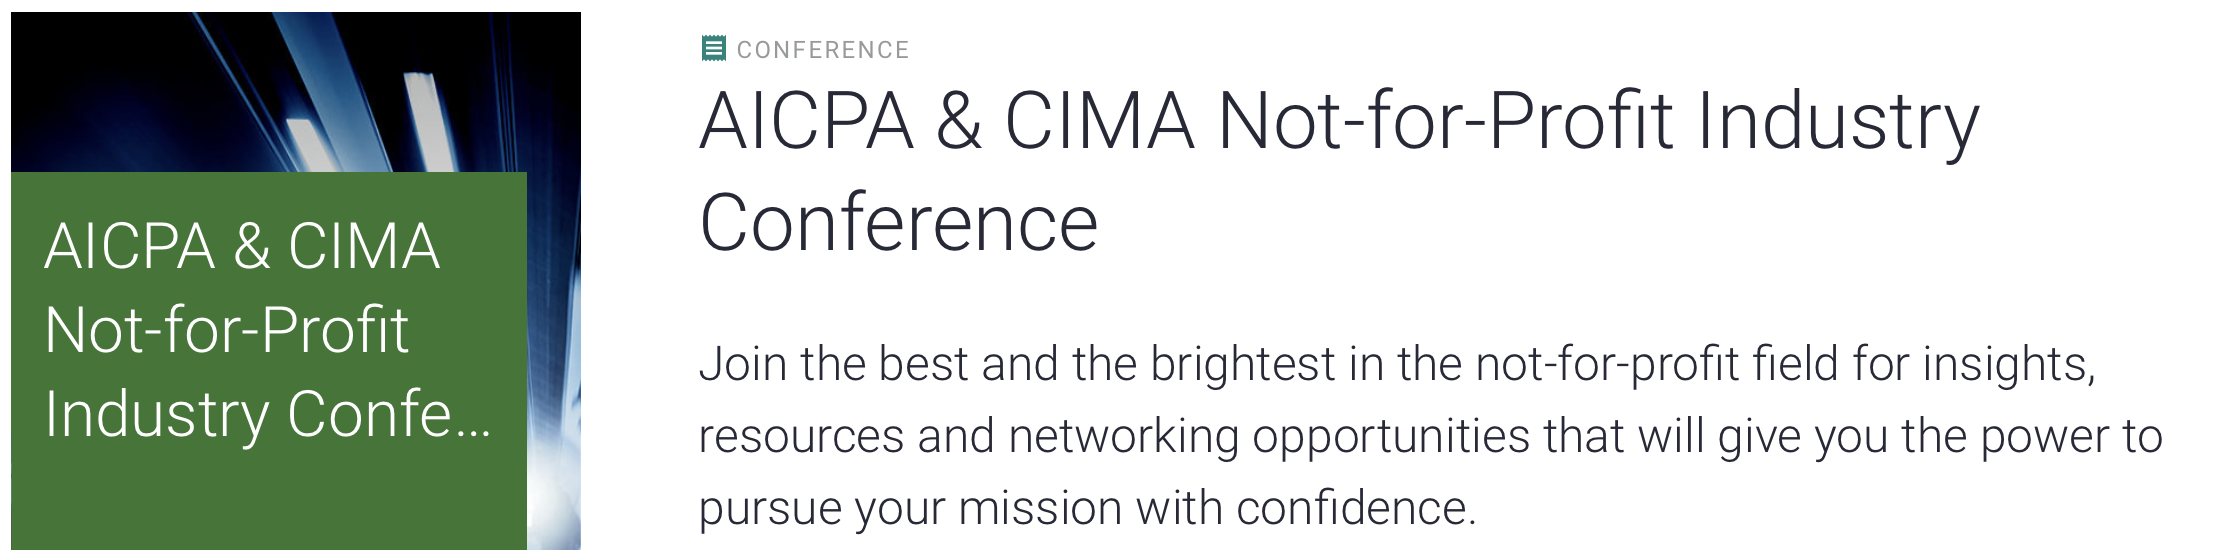 AICPA & CIMA Not-for-Profit Industry Conference 3660